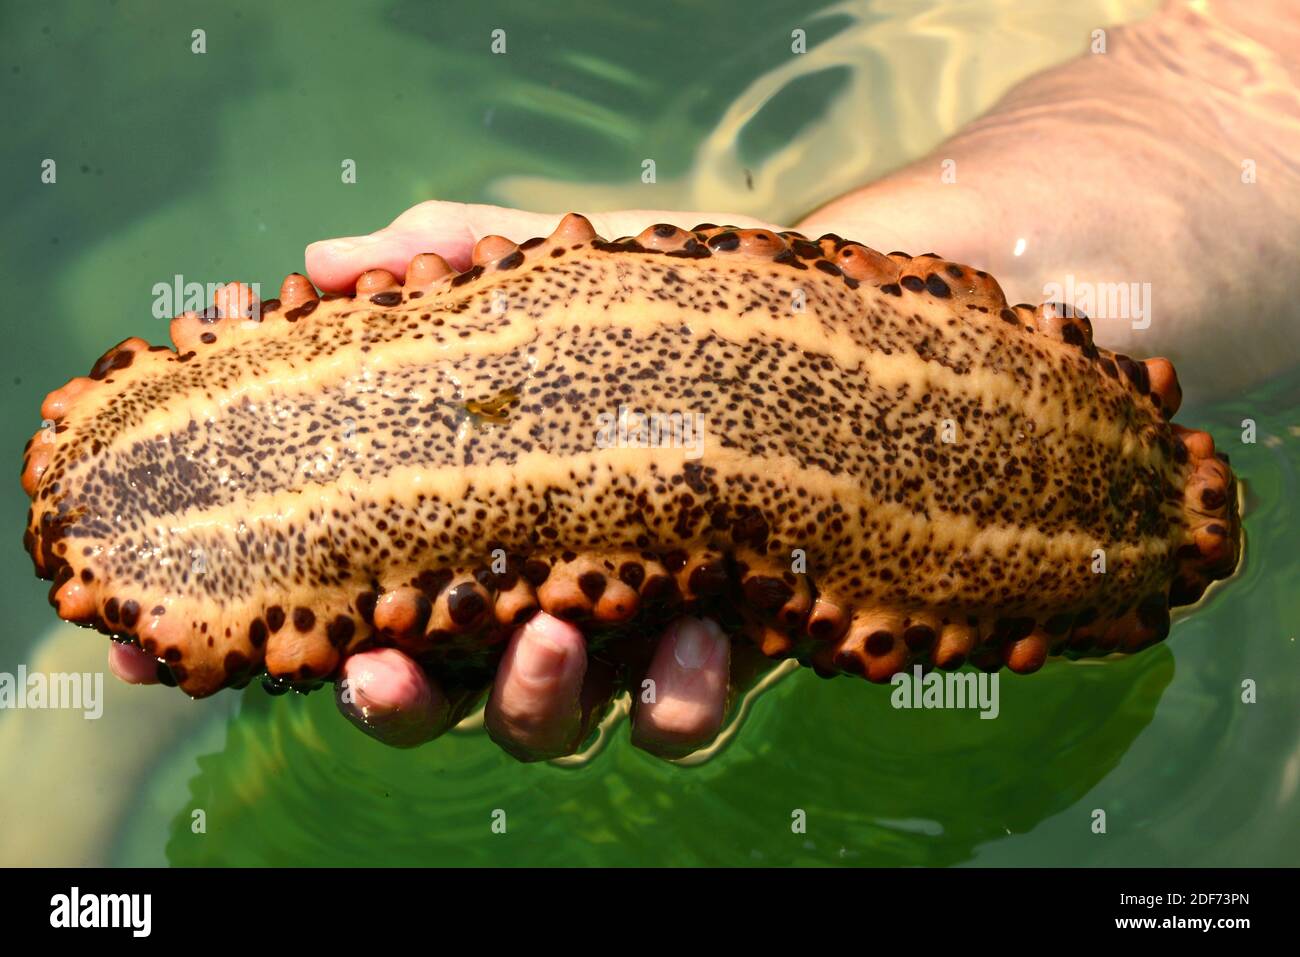 Chocolate chip cucumber (Isostichopus badionotus) is a sea cucumber native to tropical Waters of Atlantic Ocean. This photo was taken in Paraty Stock Photo